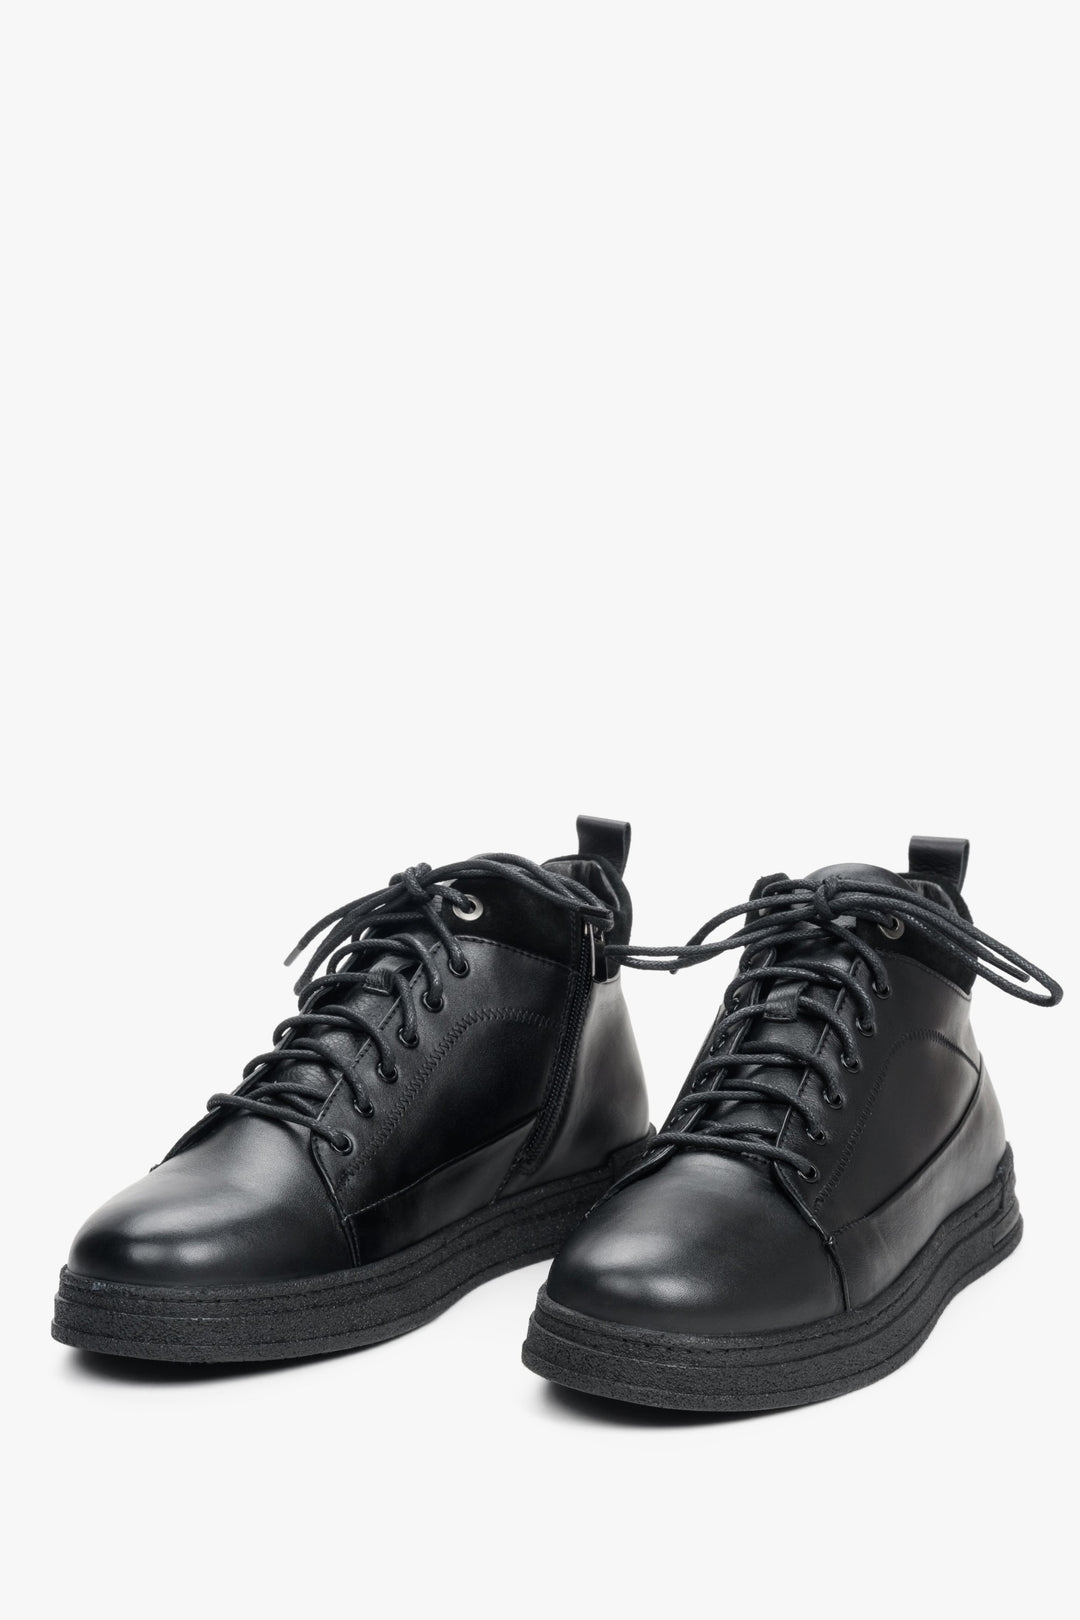 Winter high-top men's sneakers in black made of genuine leather by Estro.